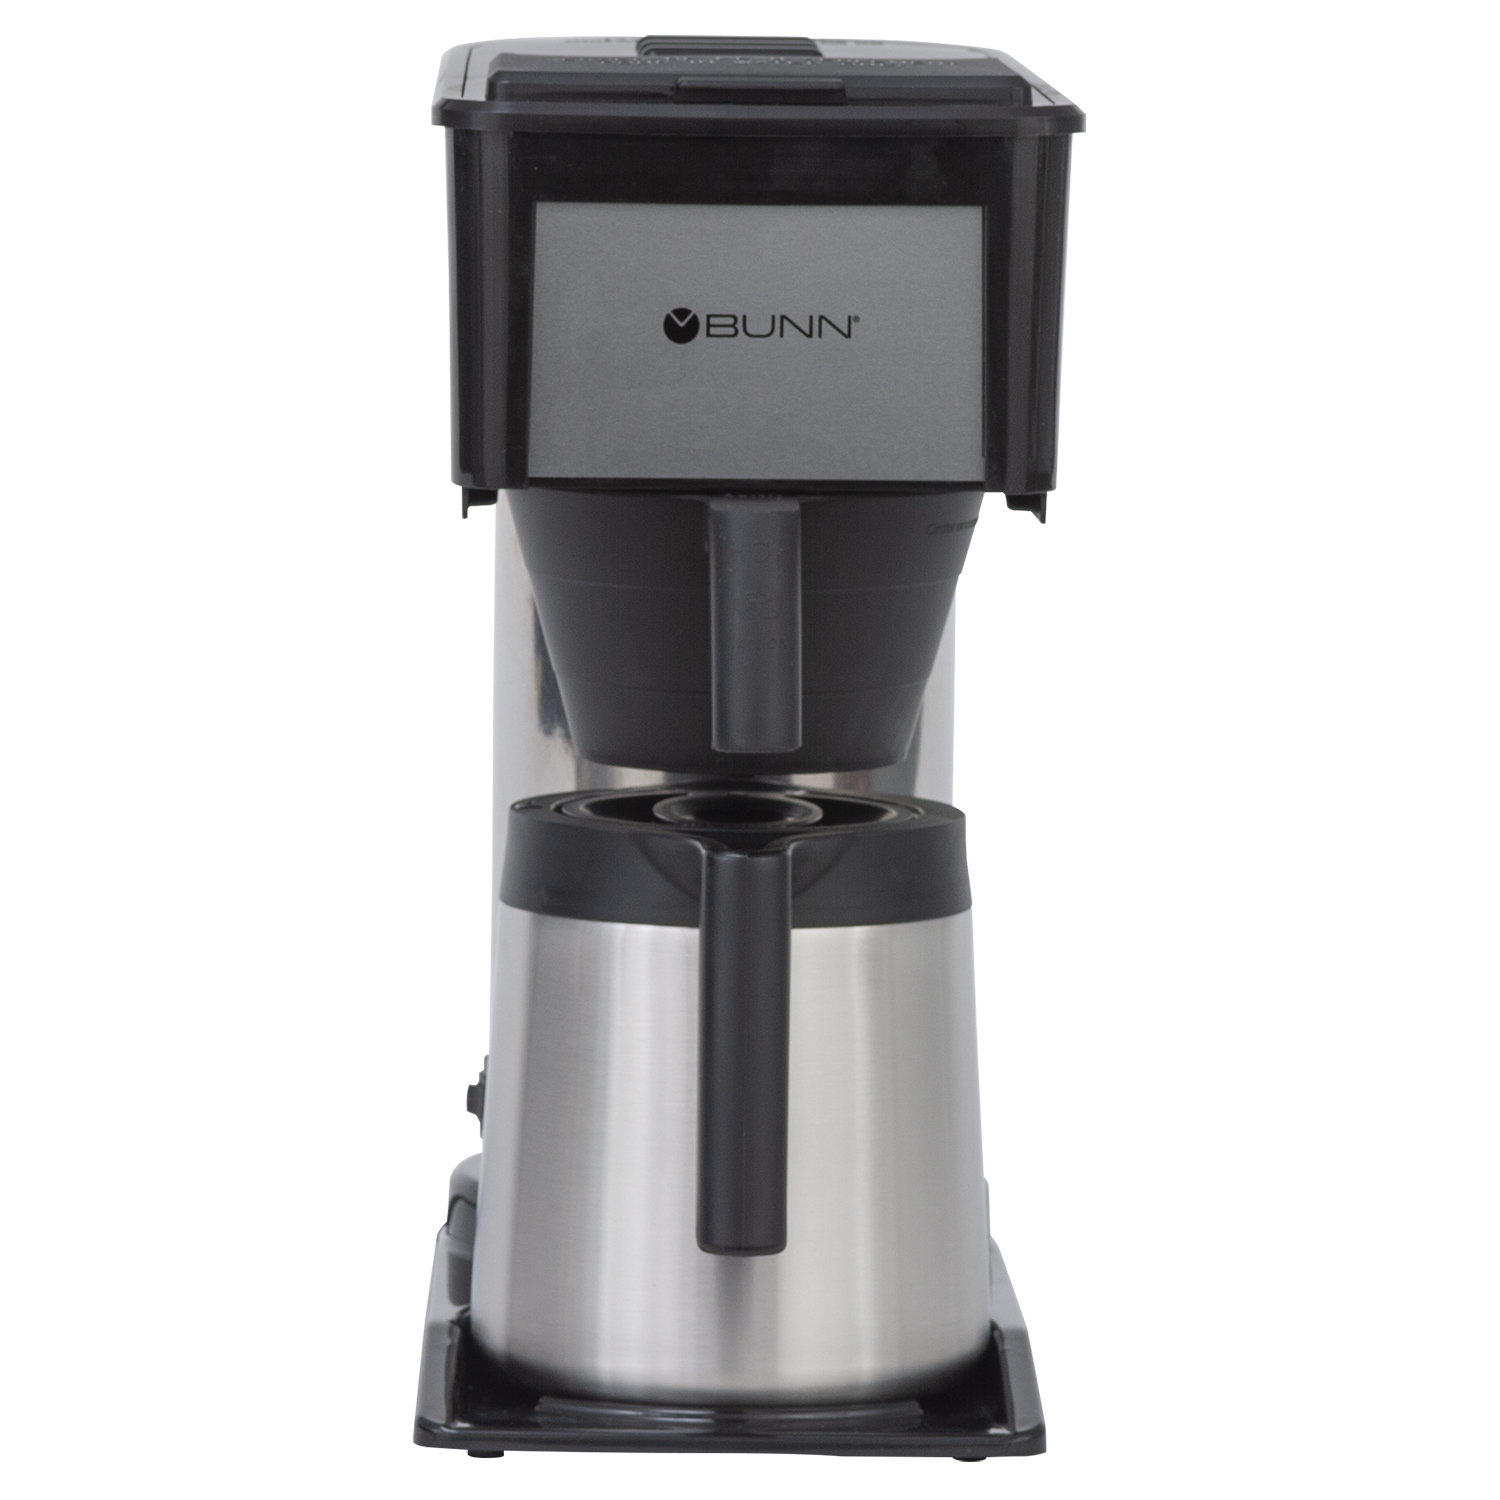 BUNN, BTX 10 Cup Black Thermal Coffee Maker (Condition: New) - image 1 of 5